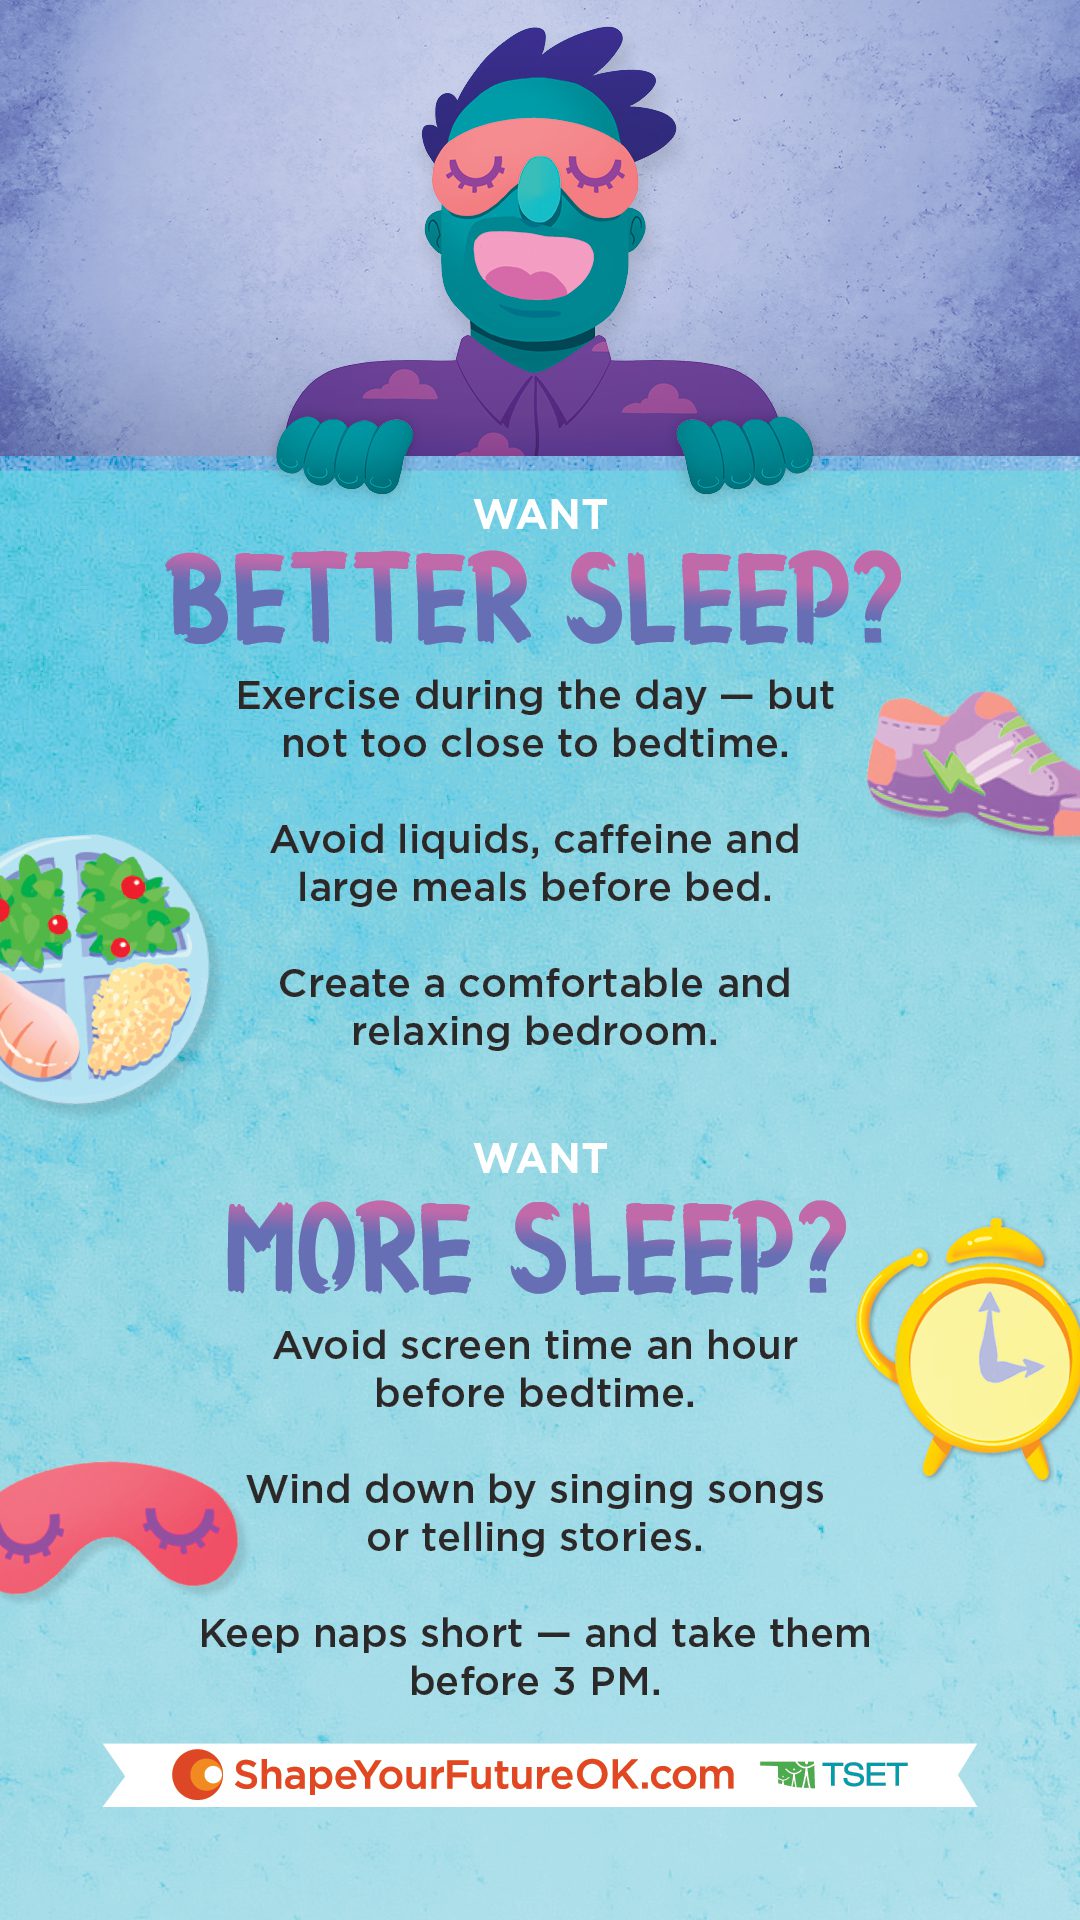 Sleep guide poster download